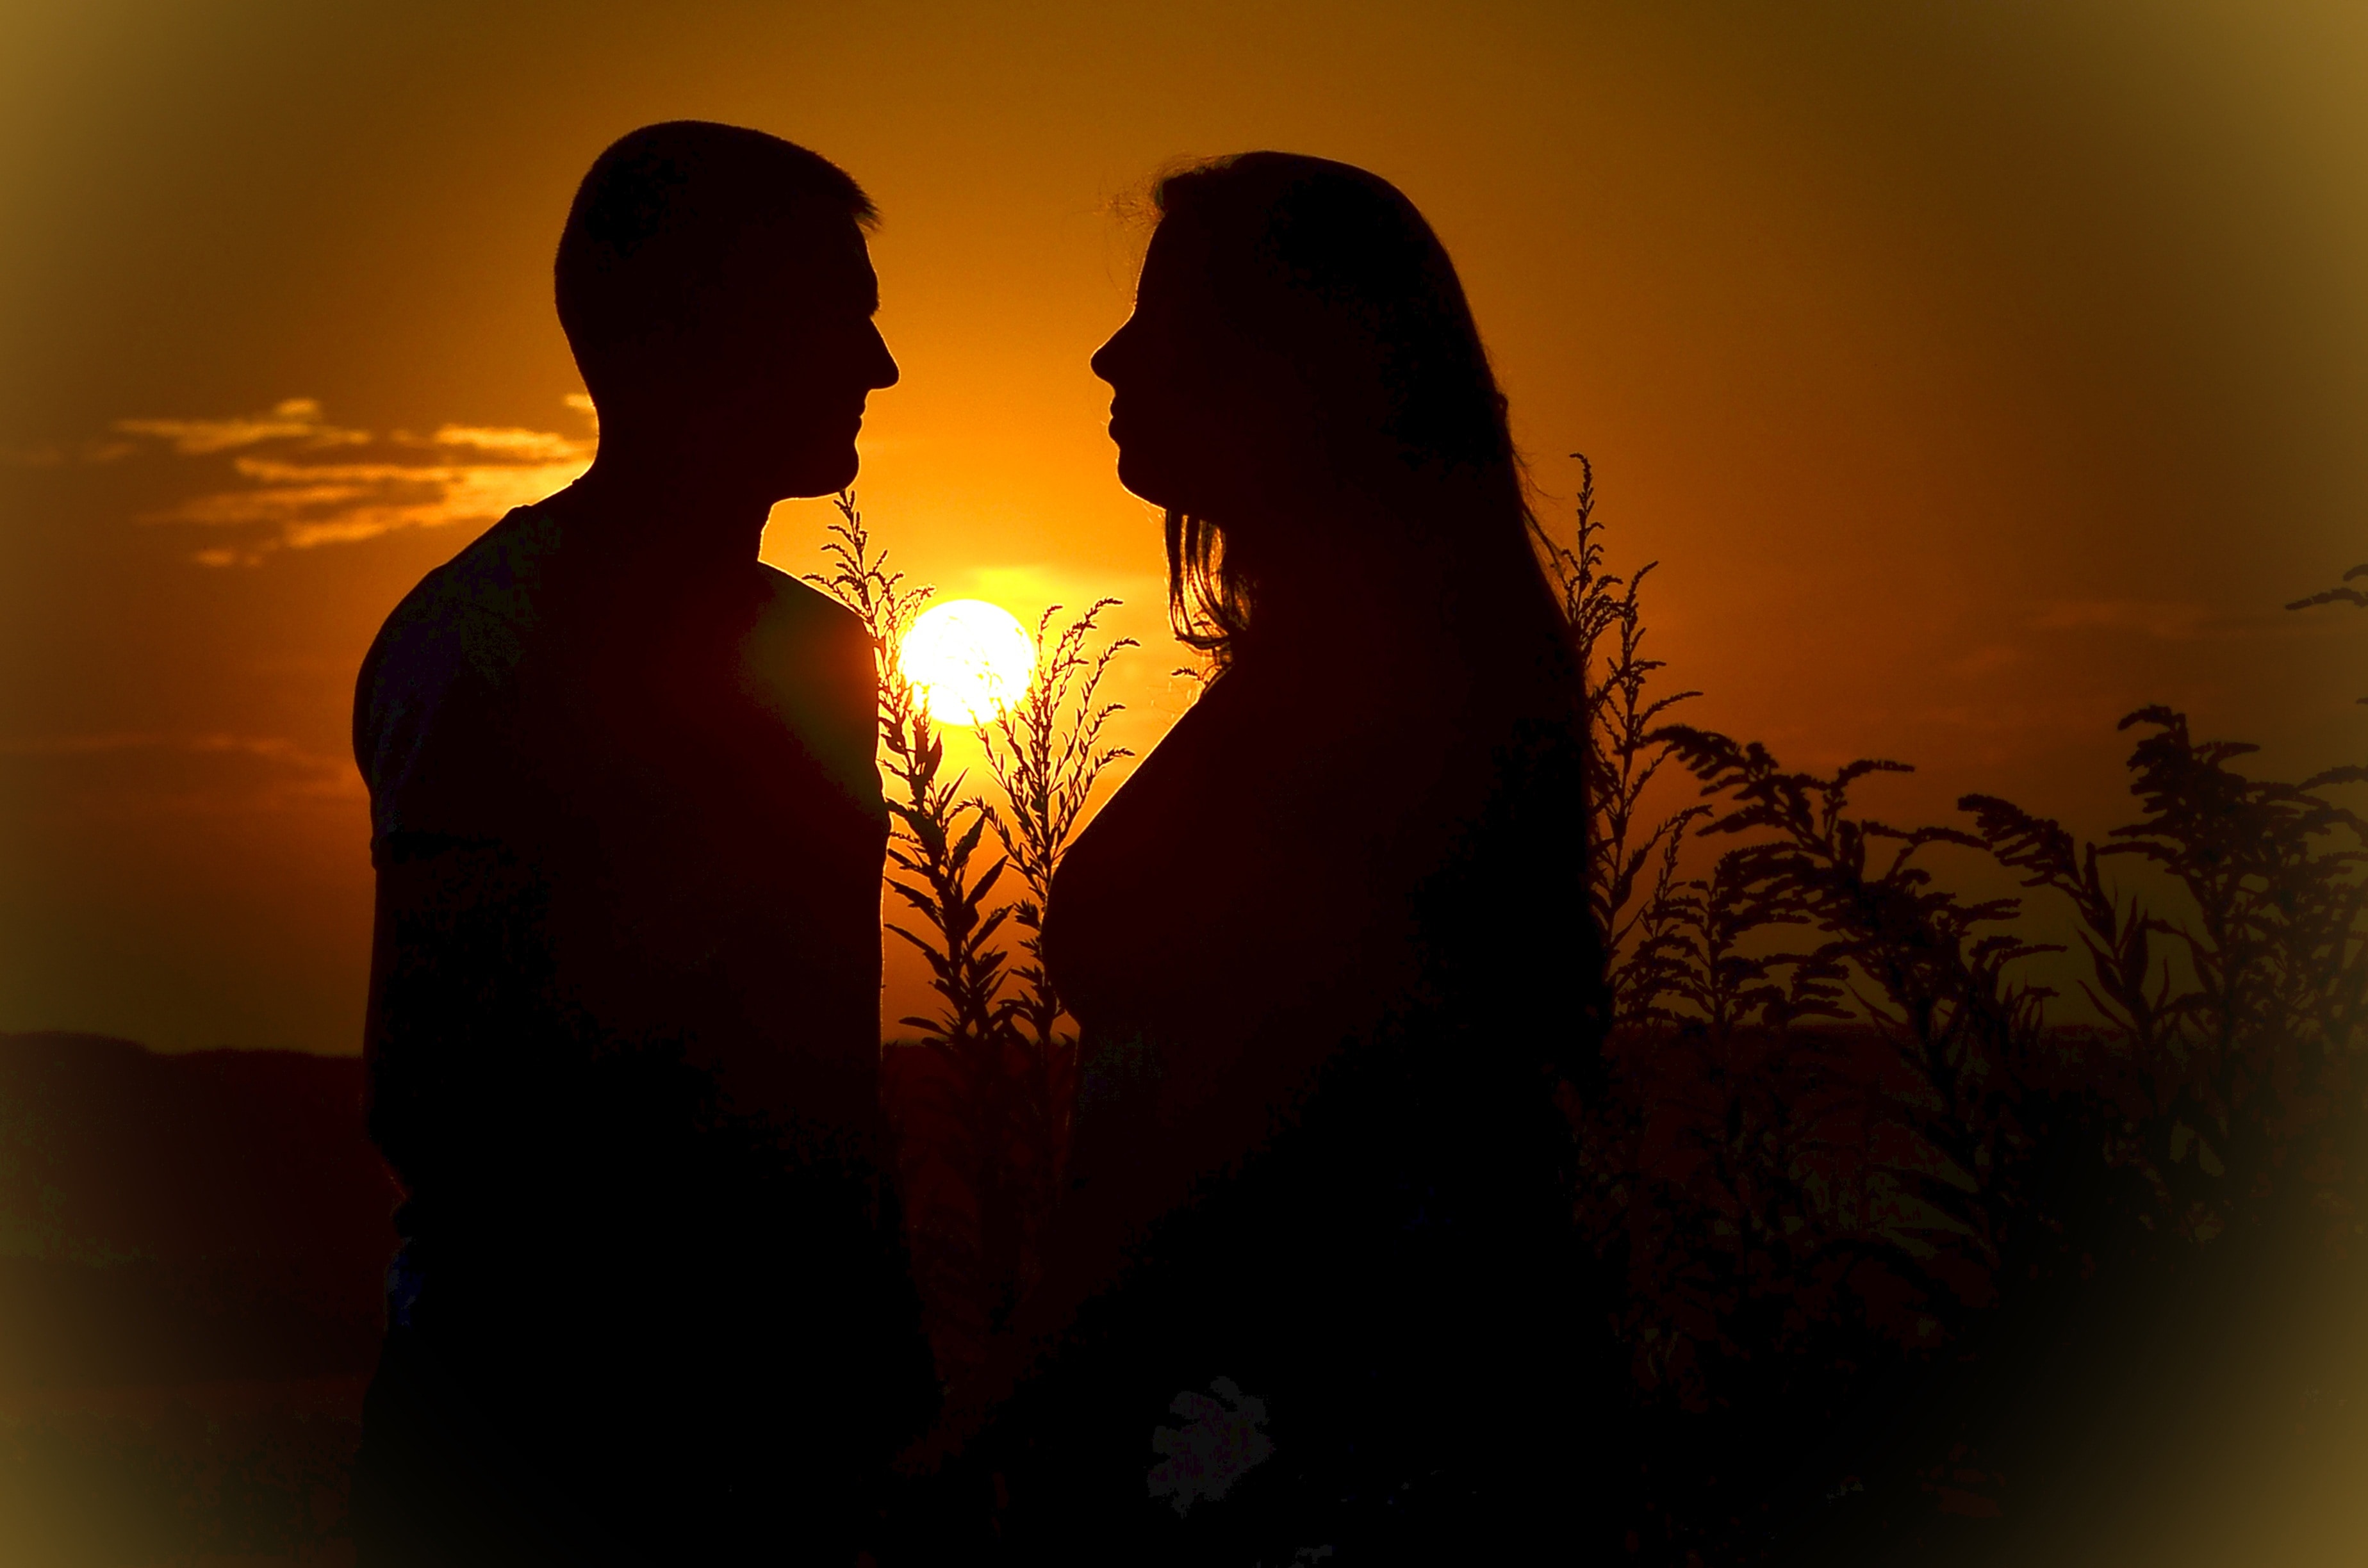 man and woman silhouette photograph free image | Peakpx